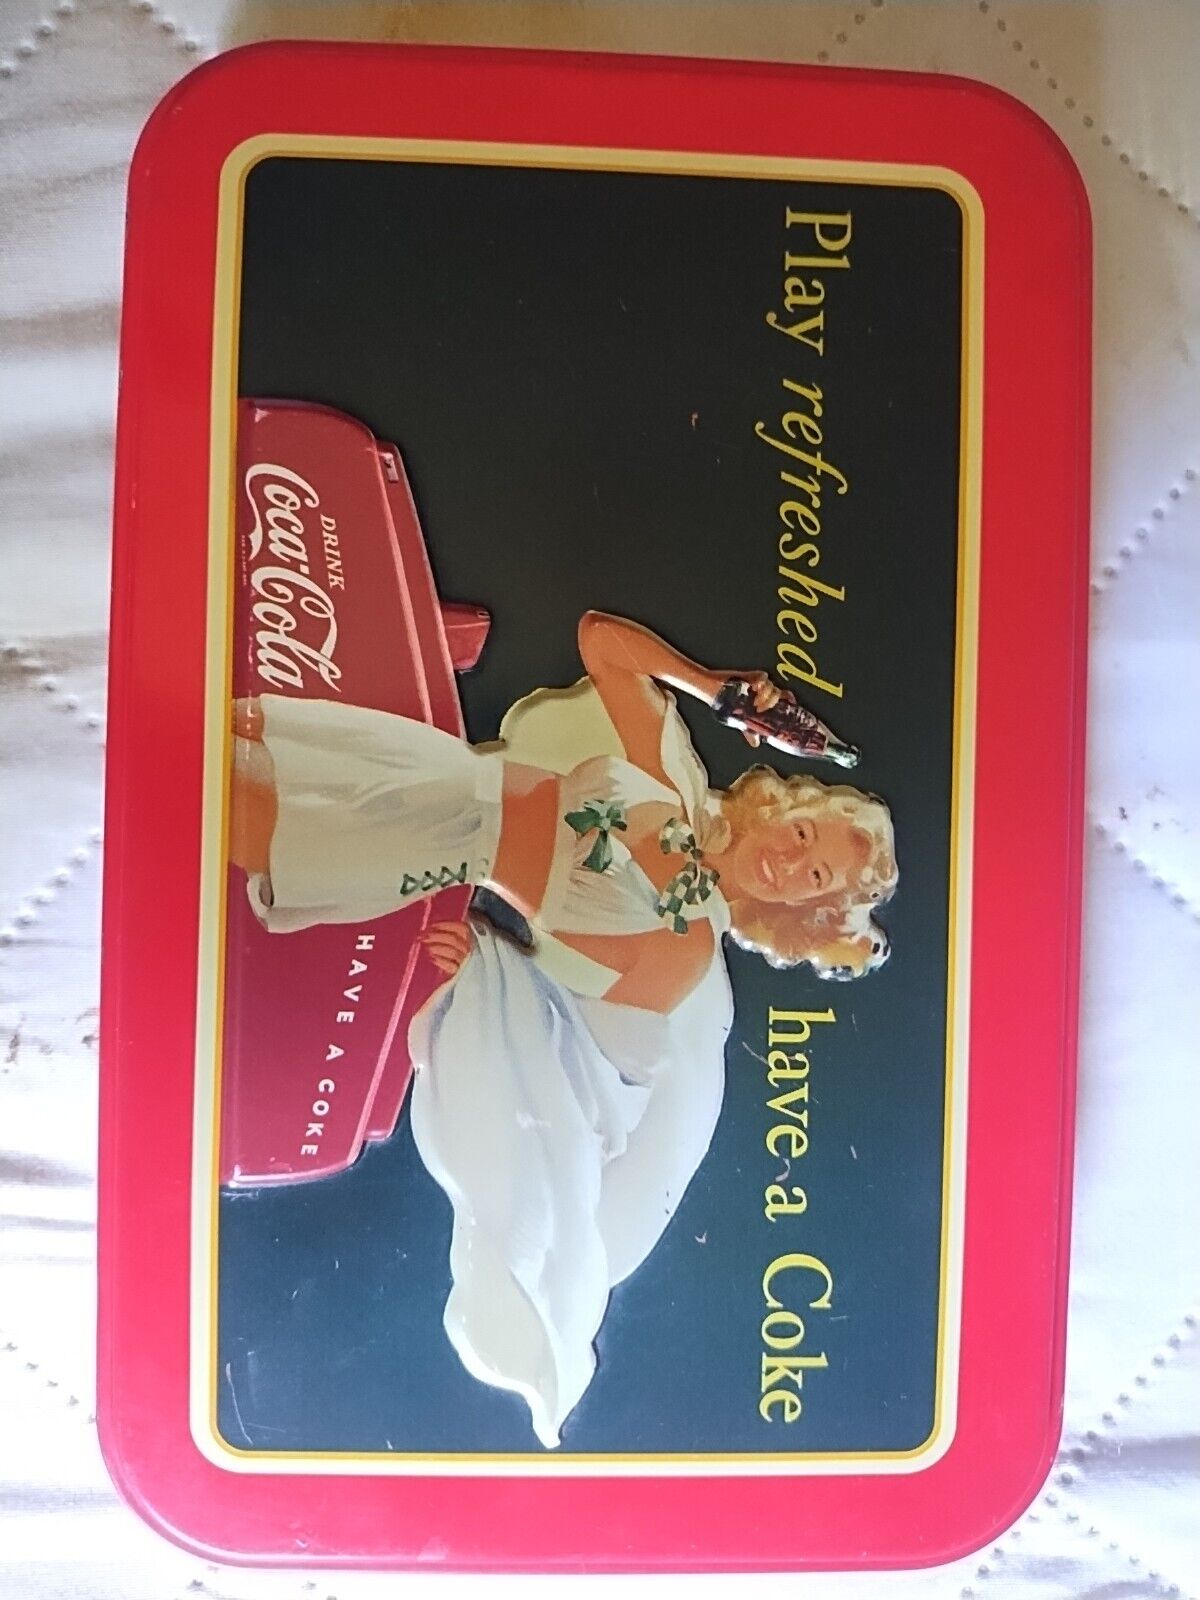 Coca-Cola Play Refreshed Have A Coke Tin Can ©2000